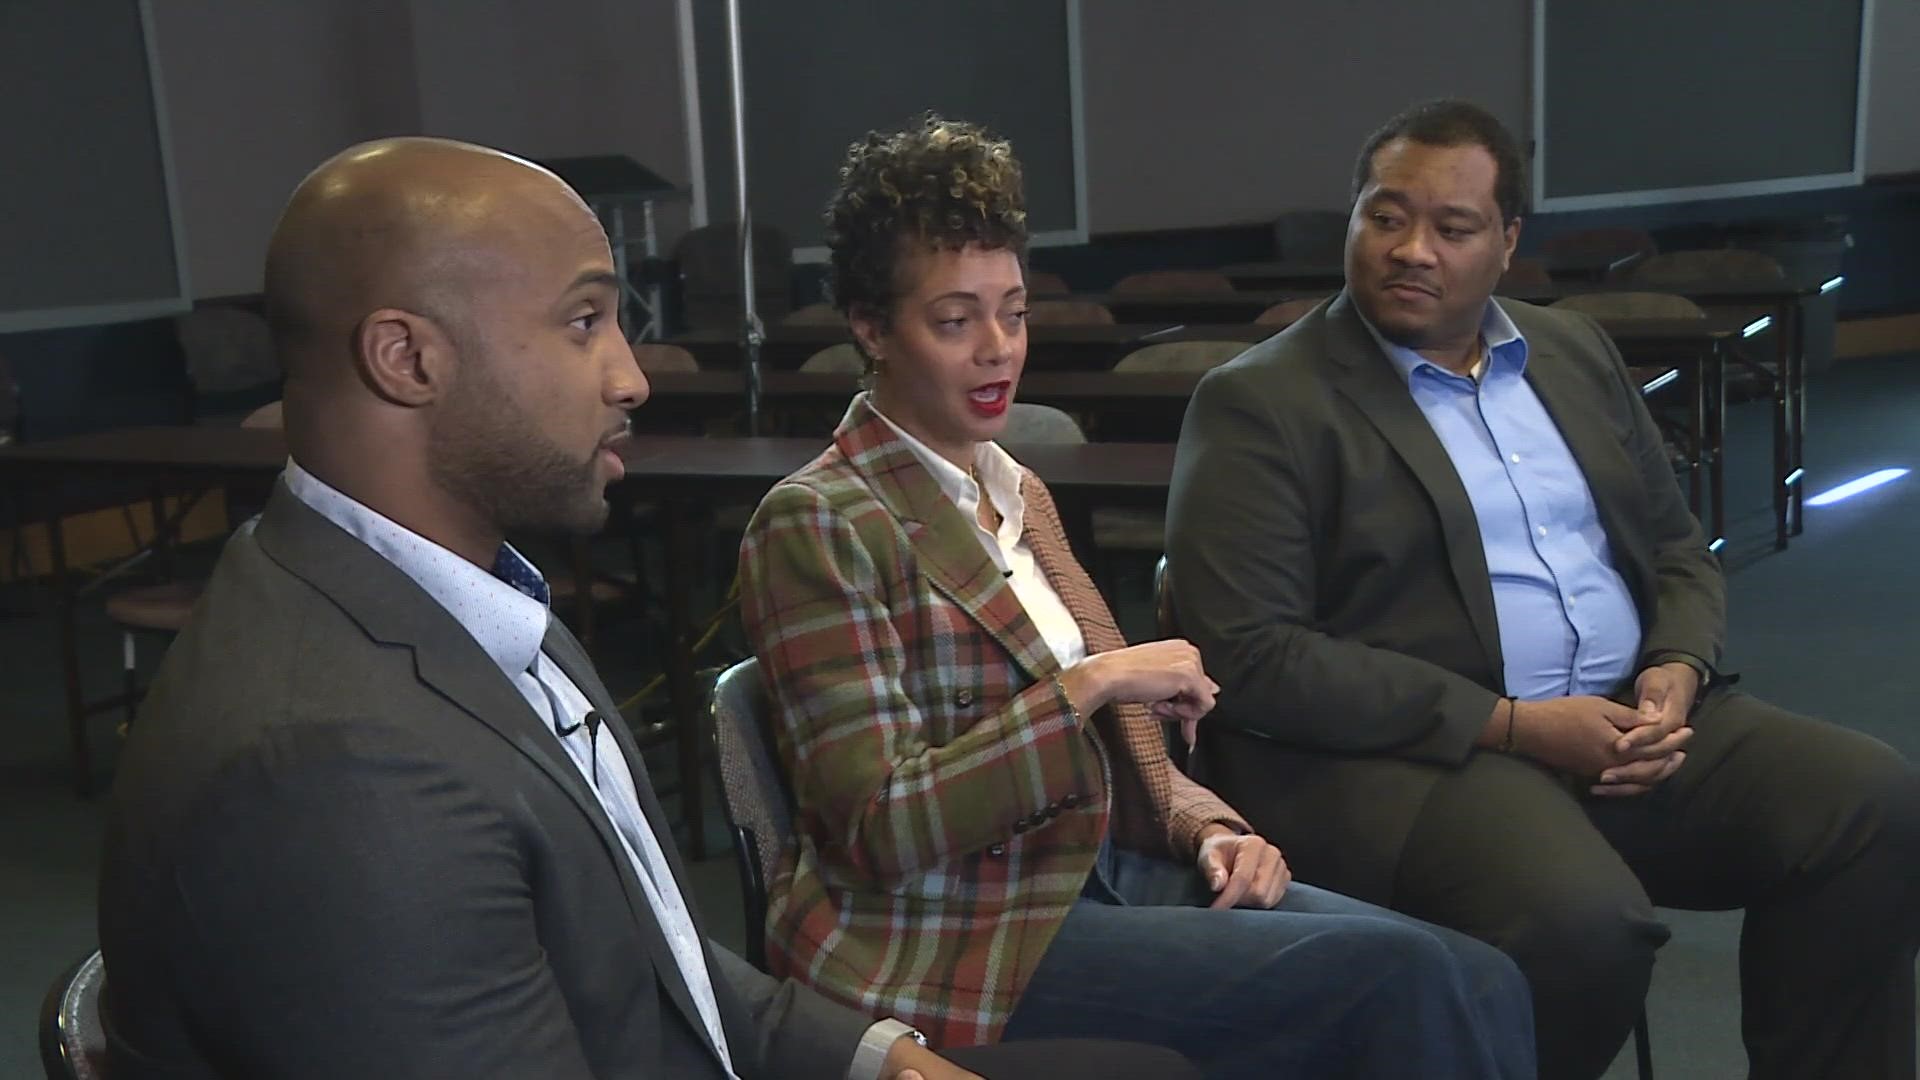 Three Black Denver natives and professionals share their stories and experiences of living in a city that is majority white.